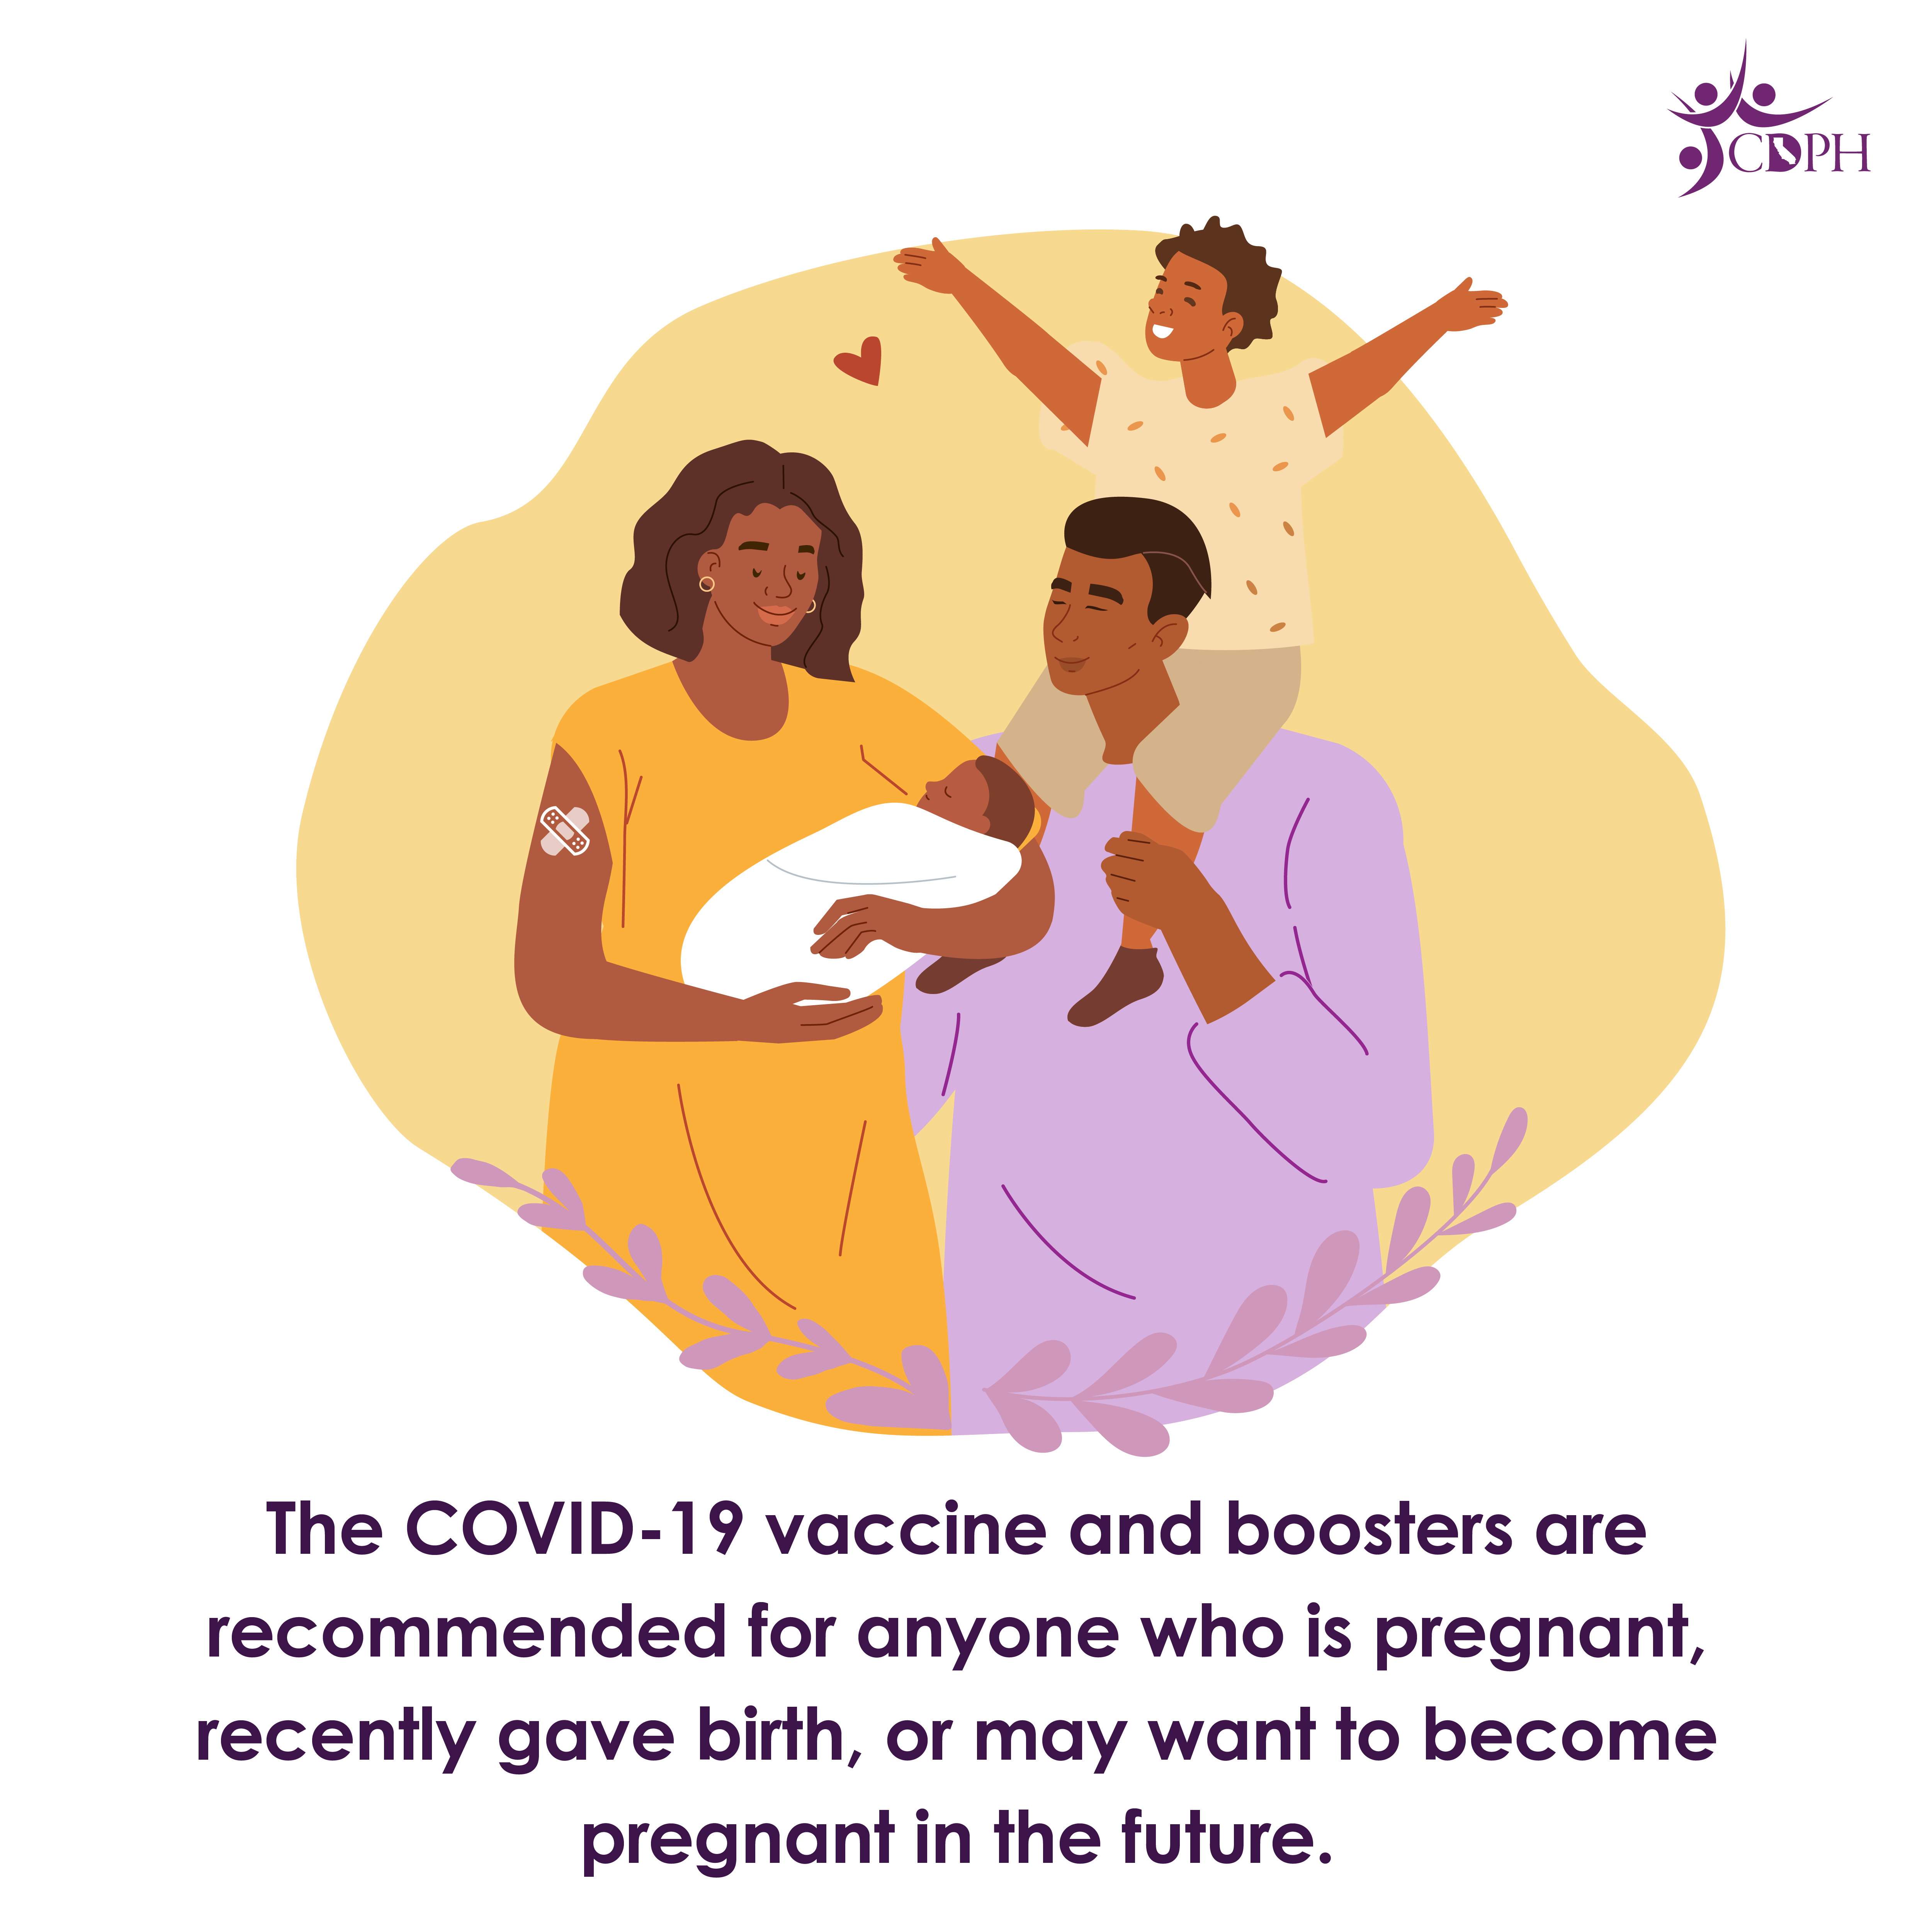 The COVID-19 vaccine and boosters are recommended for anyone who is pregnant, recently gave birth, or may want to become pregnan